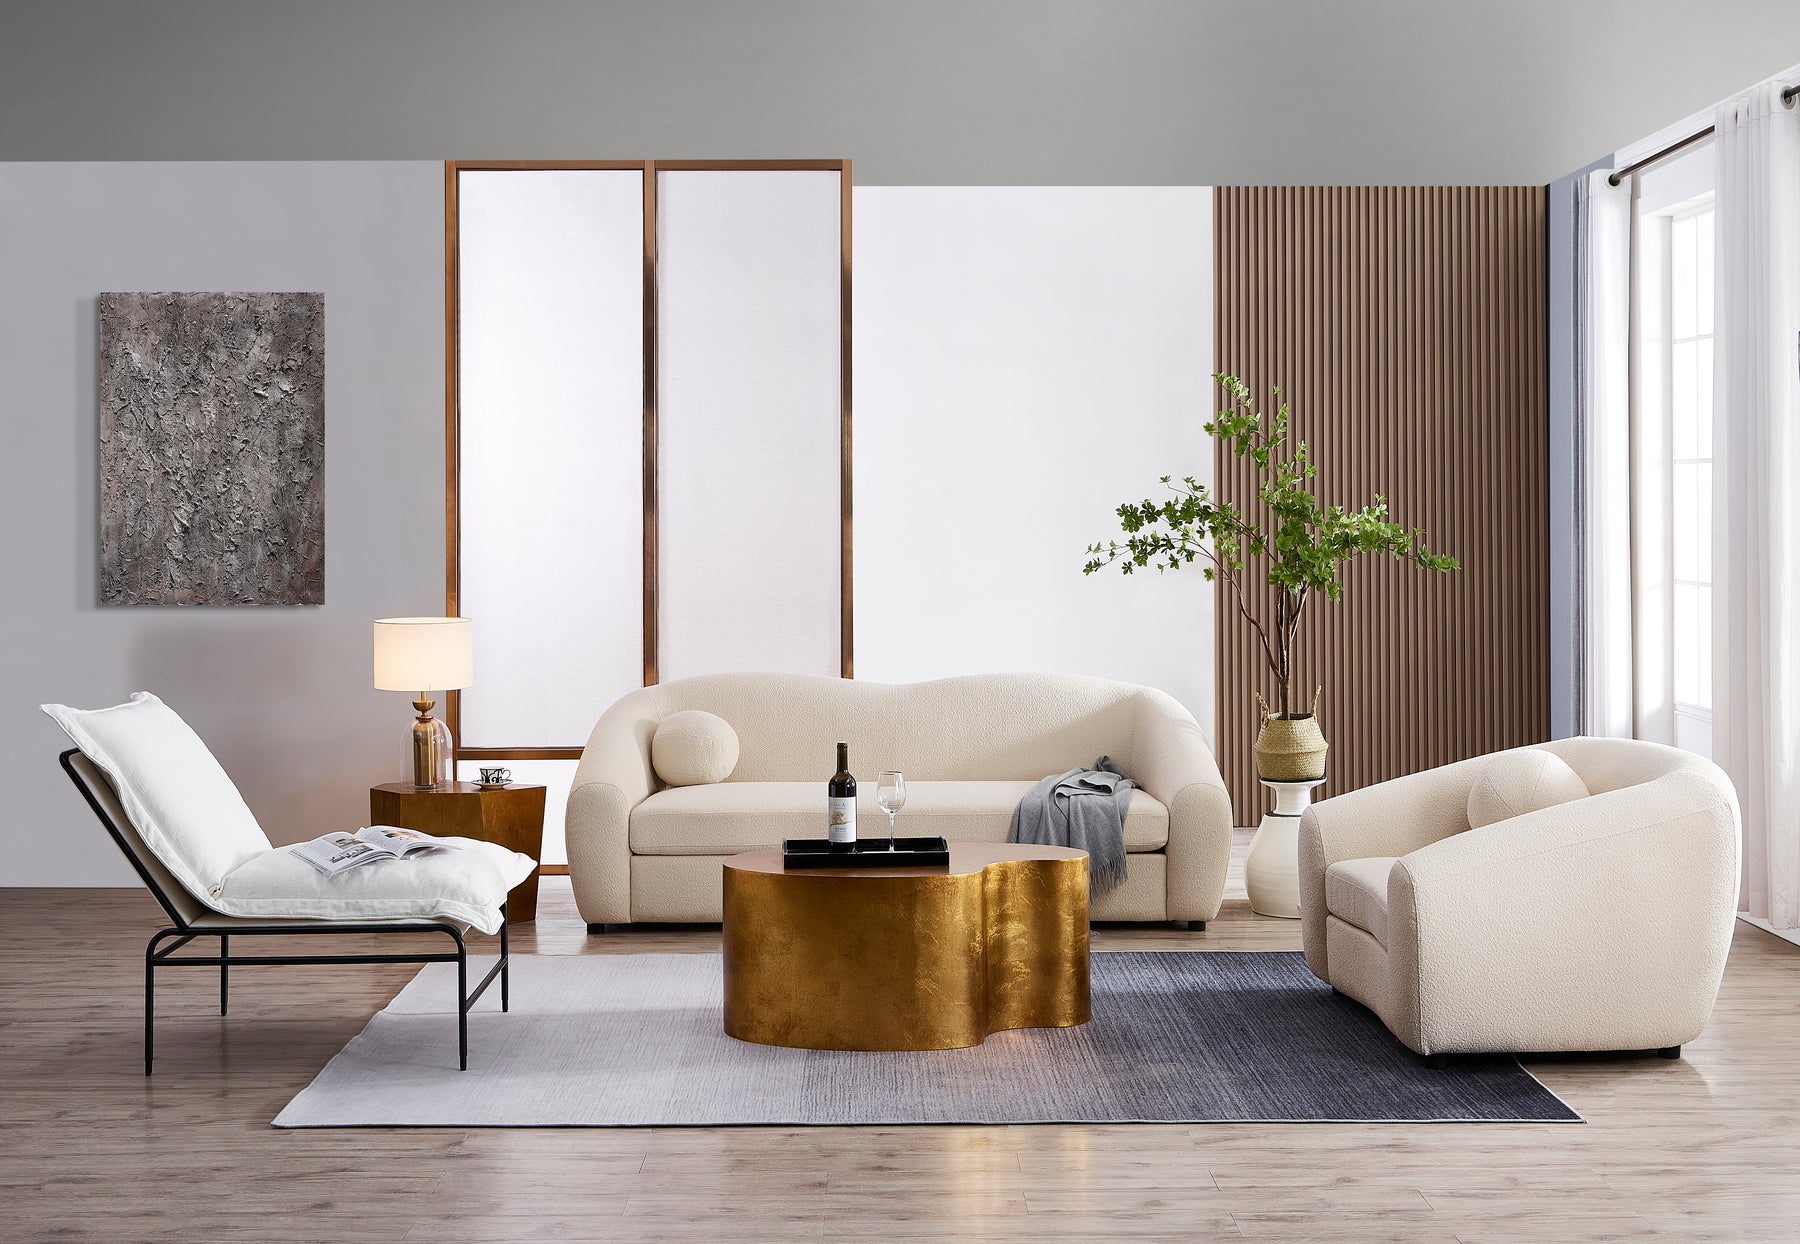 Louis Natural White Boucle Armchair and 3 Seater Sofa Front On View in a Room Setting